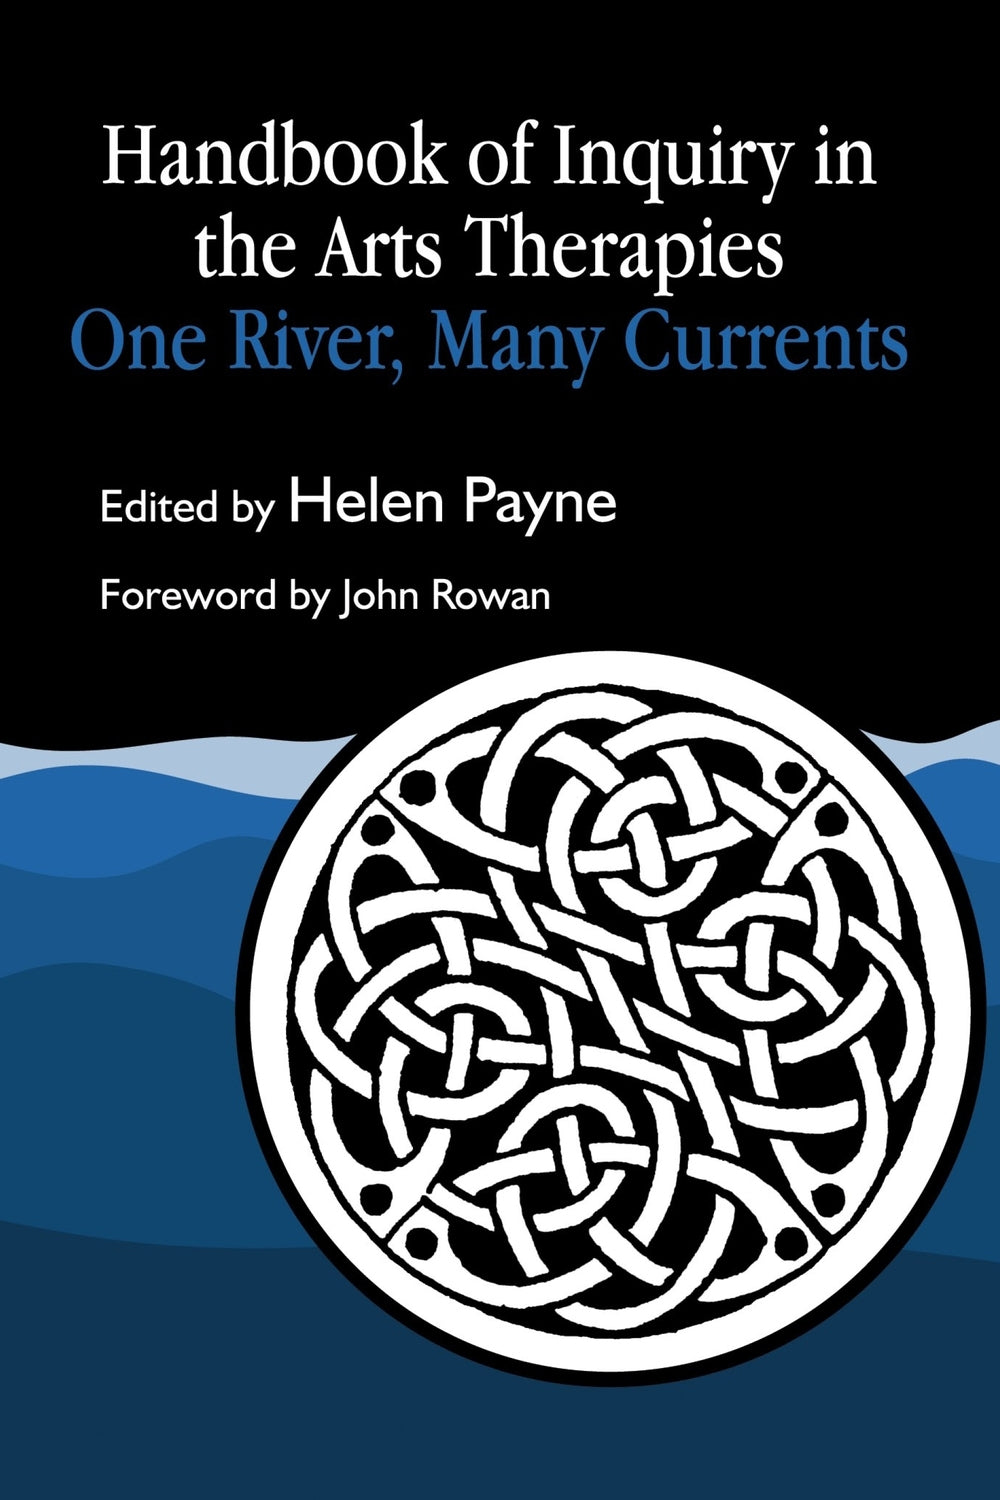 Handbook of Inquiry in the Arts Therapies by Helen Payne